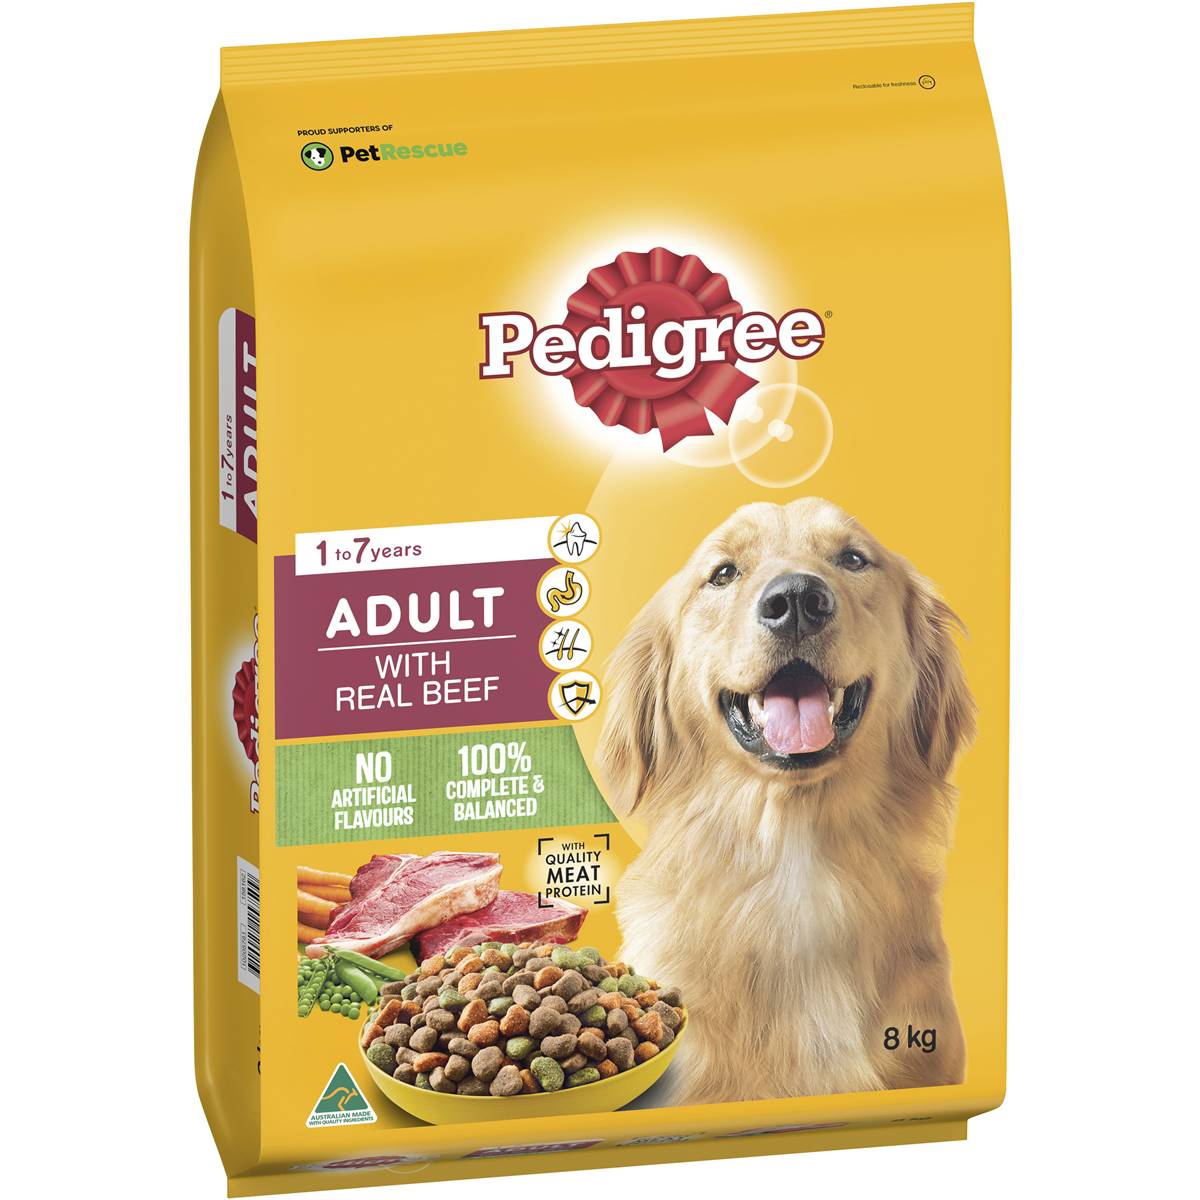 Pedigree Adult With Real Beef Dry Dog Food 8kg